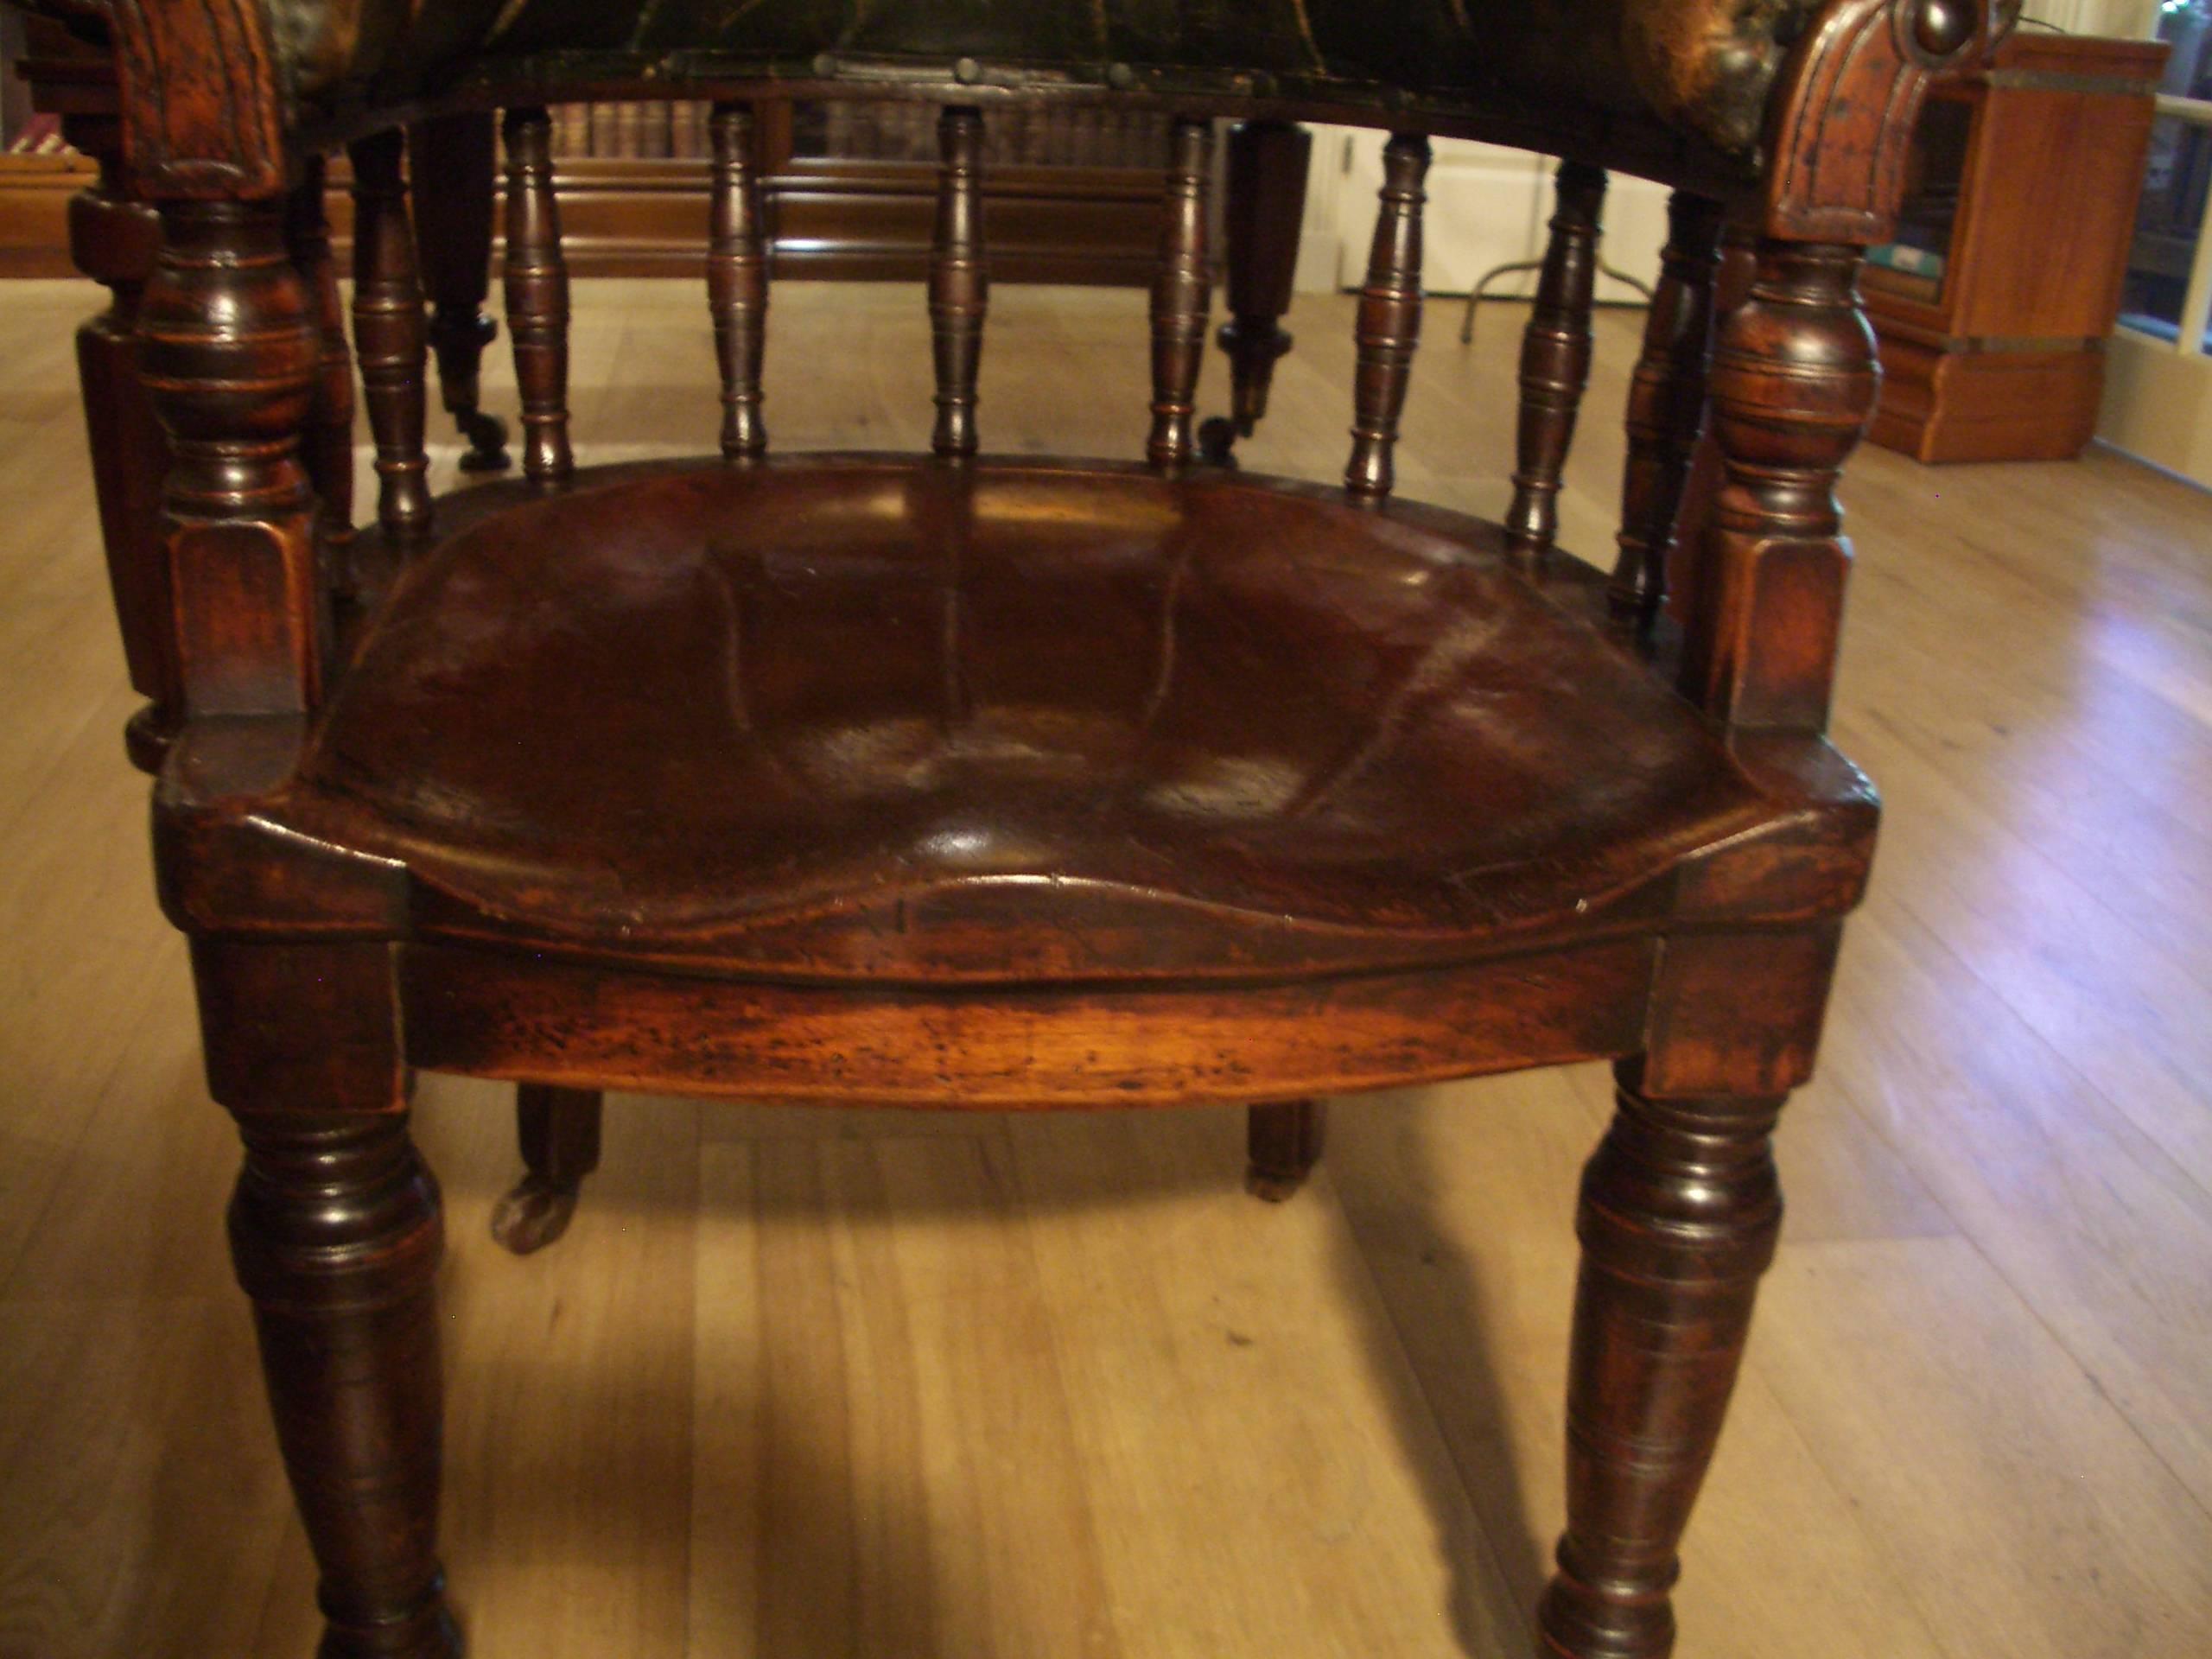 19th Century Beautiful Mahogany Desk Chair with Leather Upholstery